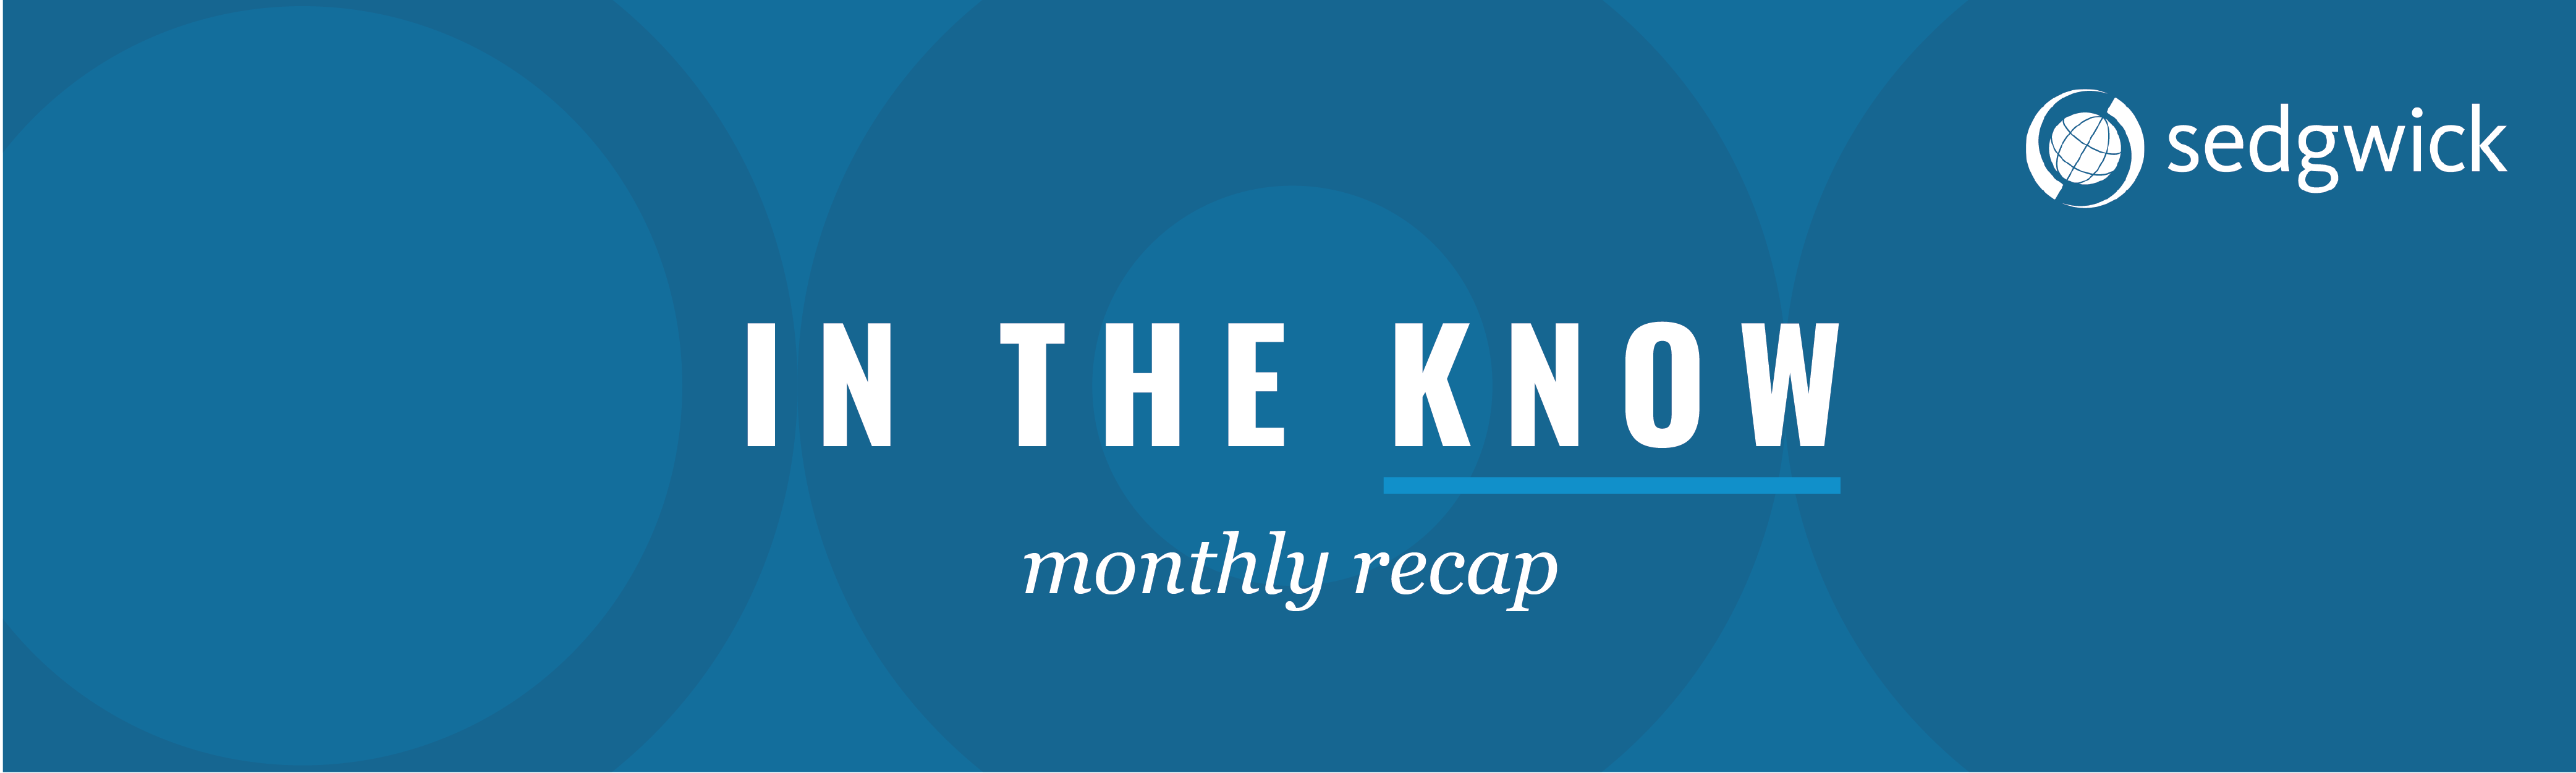 In the know monthly recap